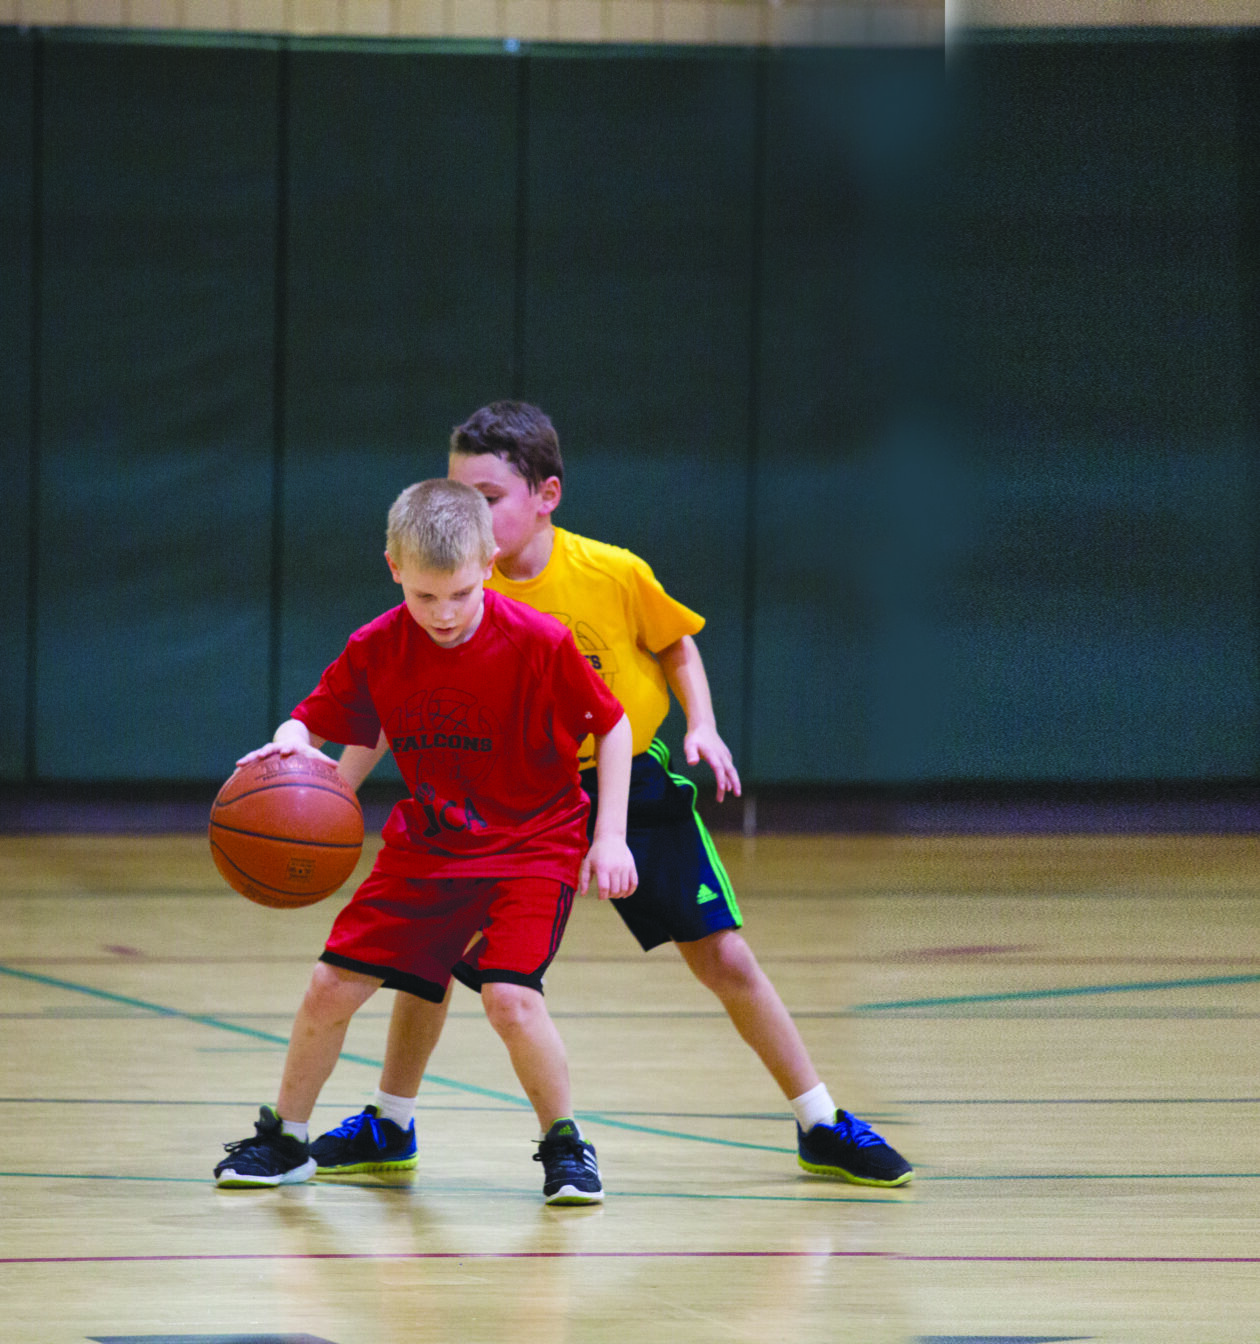 Two boys playing basketball in a gym.